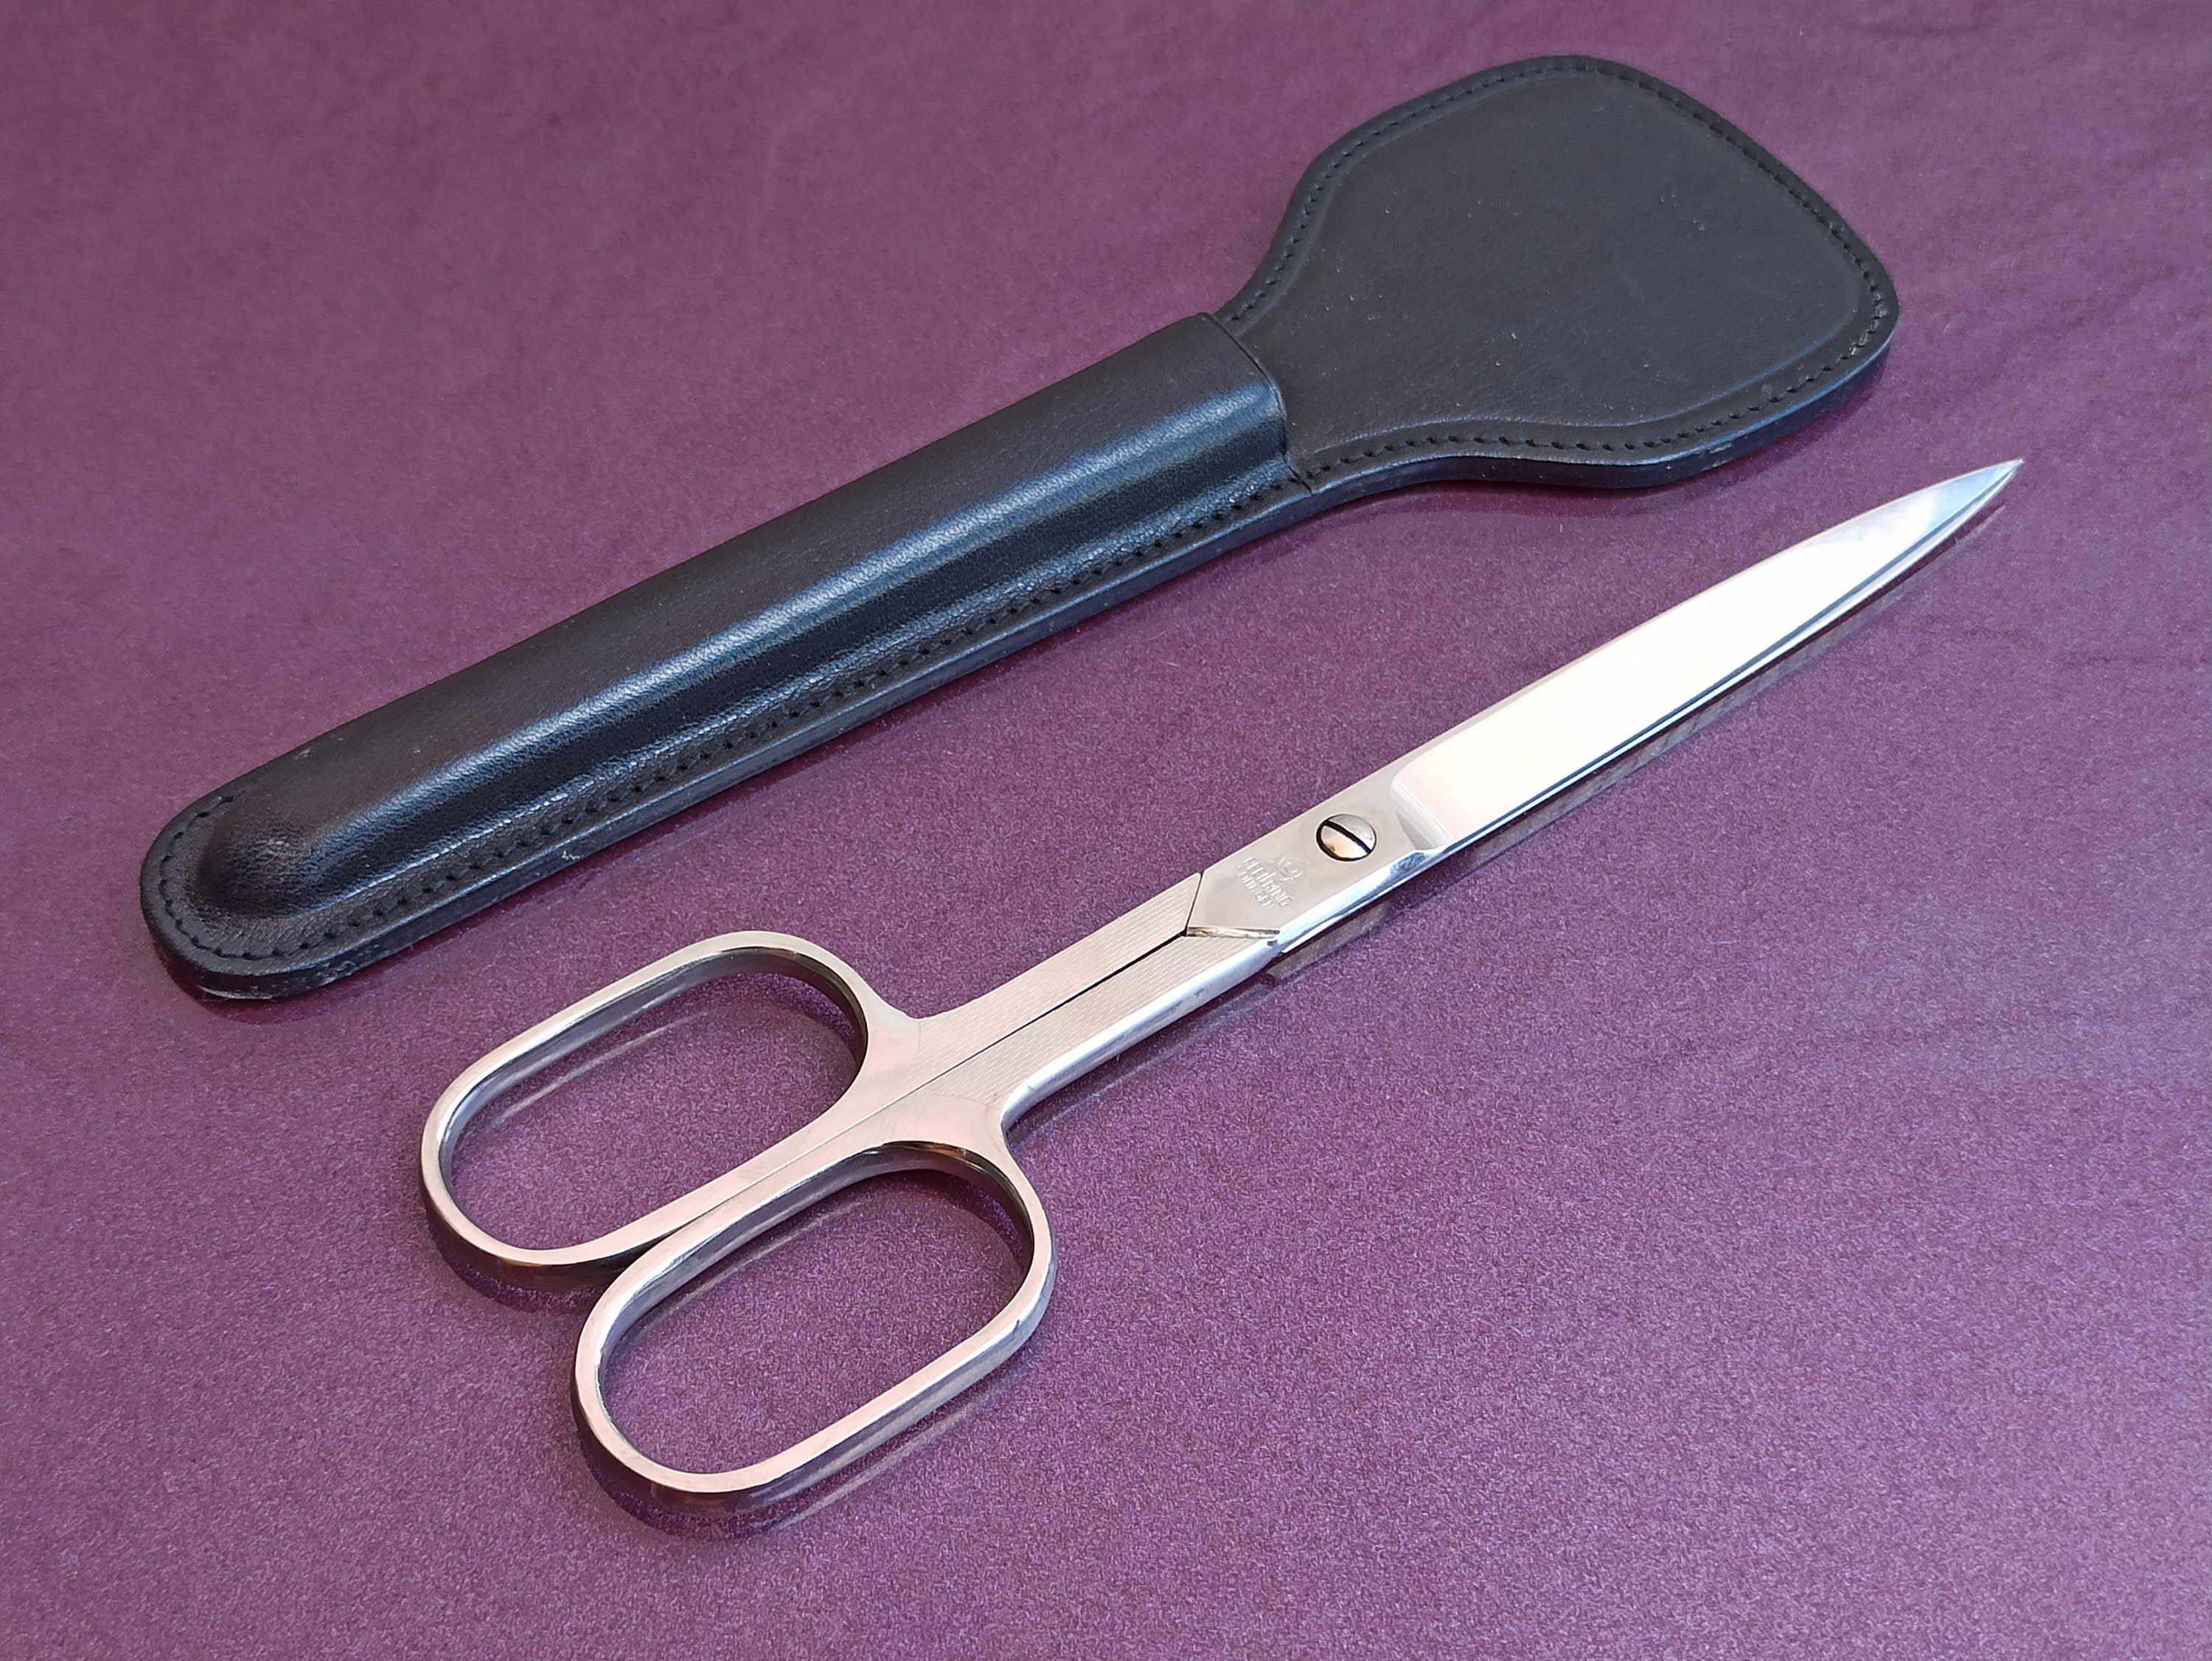 Pfeilring Manicure Scissors Nickel Plated 4120nic for sale online